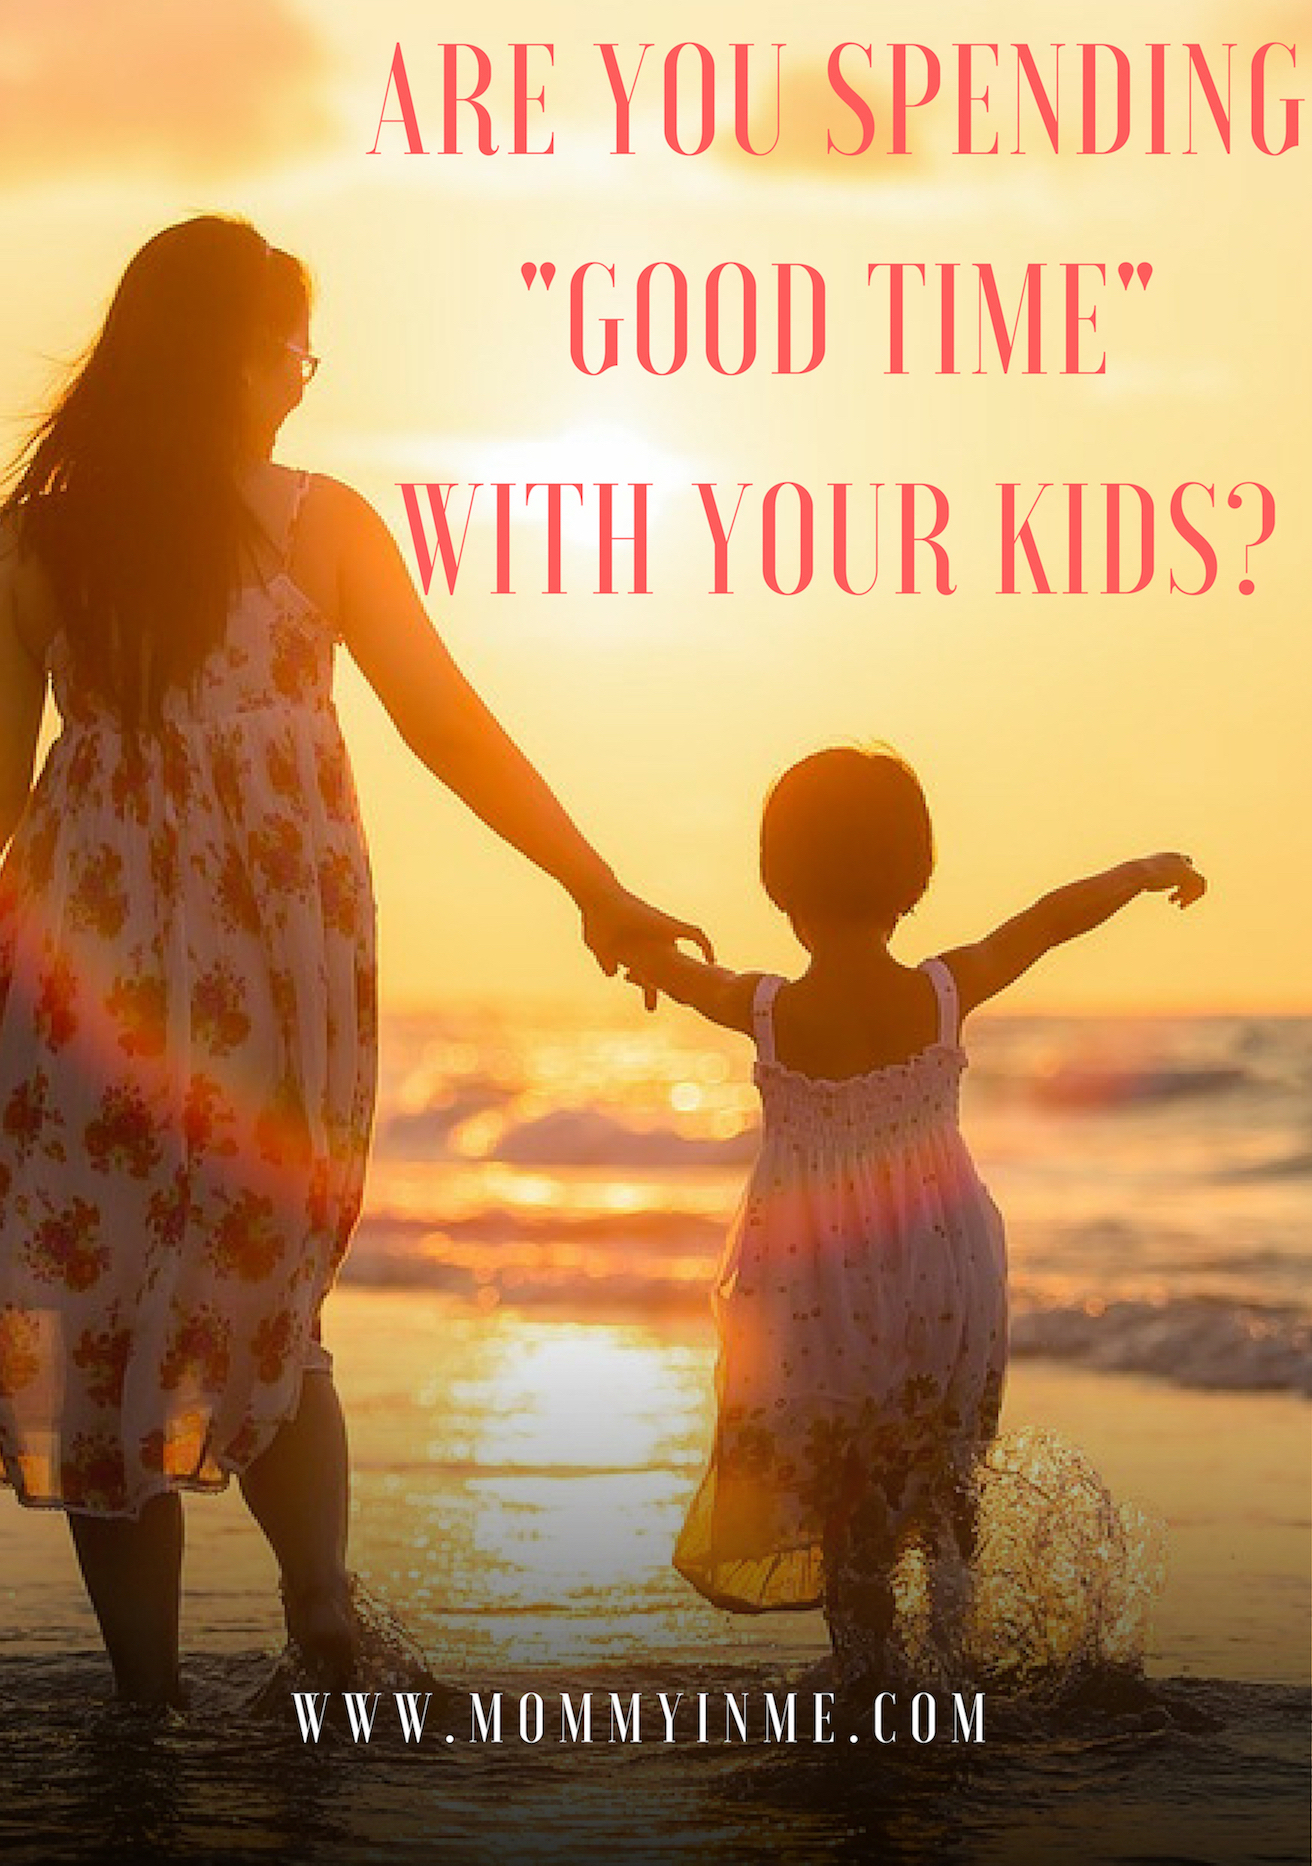 Are you really spending the right amount of time with your kids ? believe me, to have some quality time, spending good amount of time with kids is important. It ushers a new confidence and empathy in kids. Read more for parenting tips. #qualitytime #parenting #parentinghack #momguilt #kids #raisingchildren #raisingkids #mom #momgoals